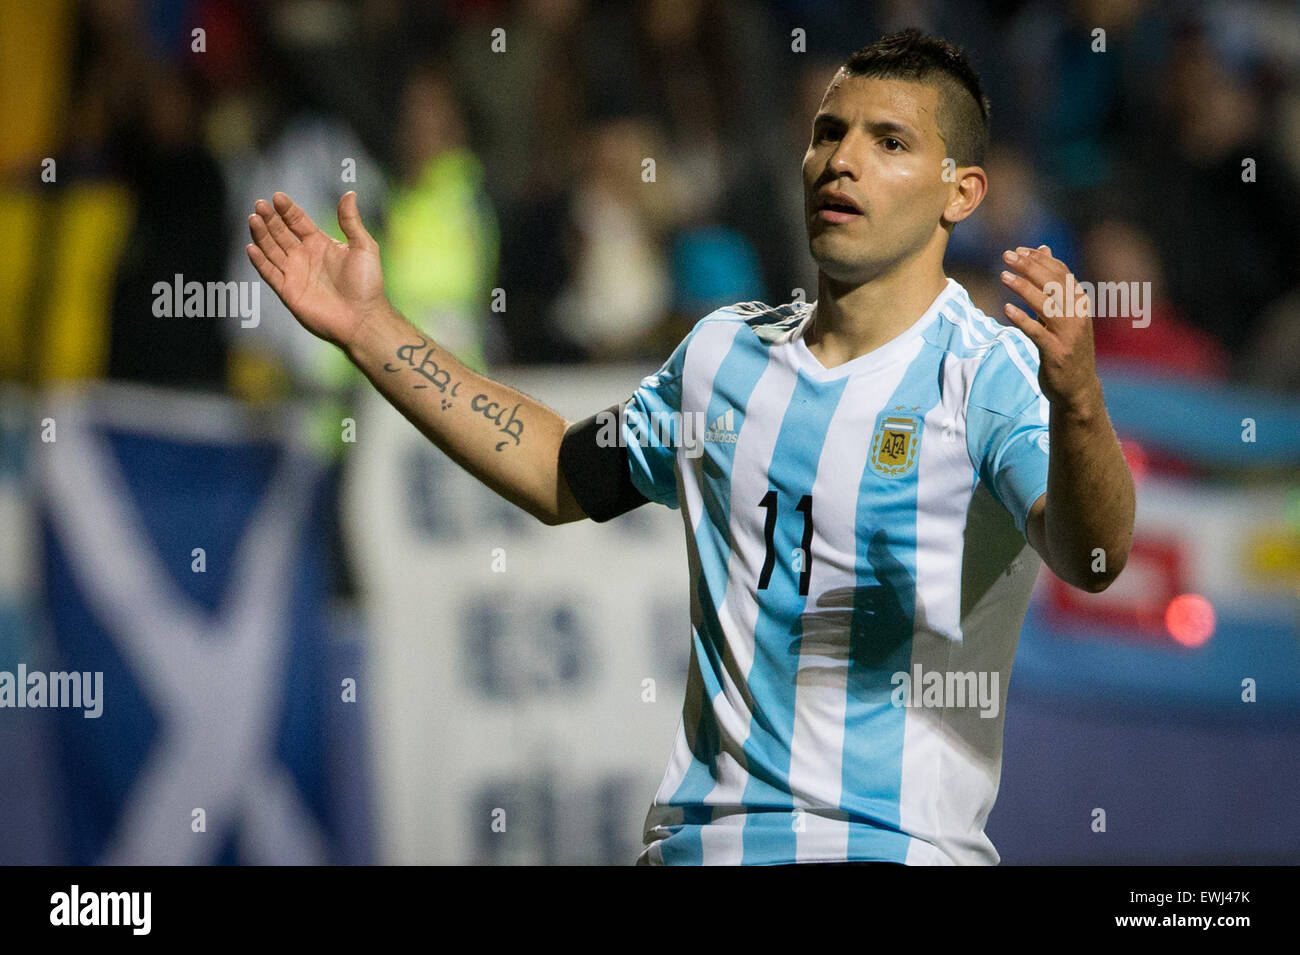 Vina Del Mar, Chile. 26th June, 2015. Argentina's Sergio Aguero reacts during the quarter-final match between Argentina and Colombia at the Copa America Chile 2015 in the El Sausalito Stadium, in Vina del Mar city, Chile, on June 26, 2015. Credit:  Pedro Mera/Xinhua/Alamy Live News Stock Photo